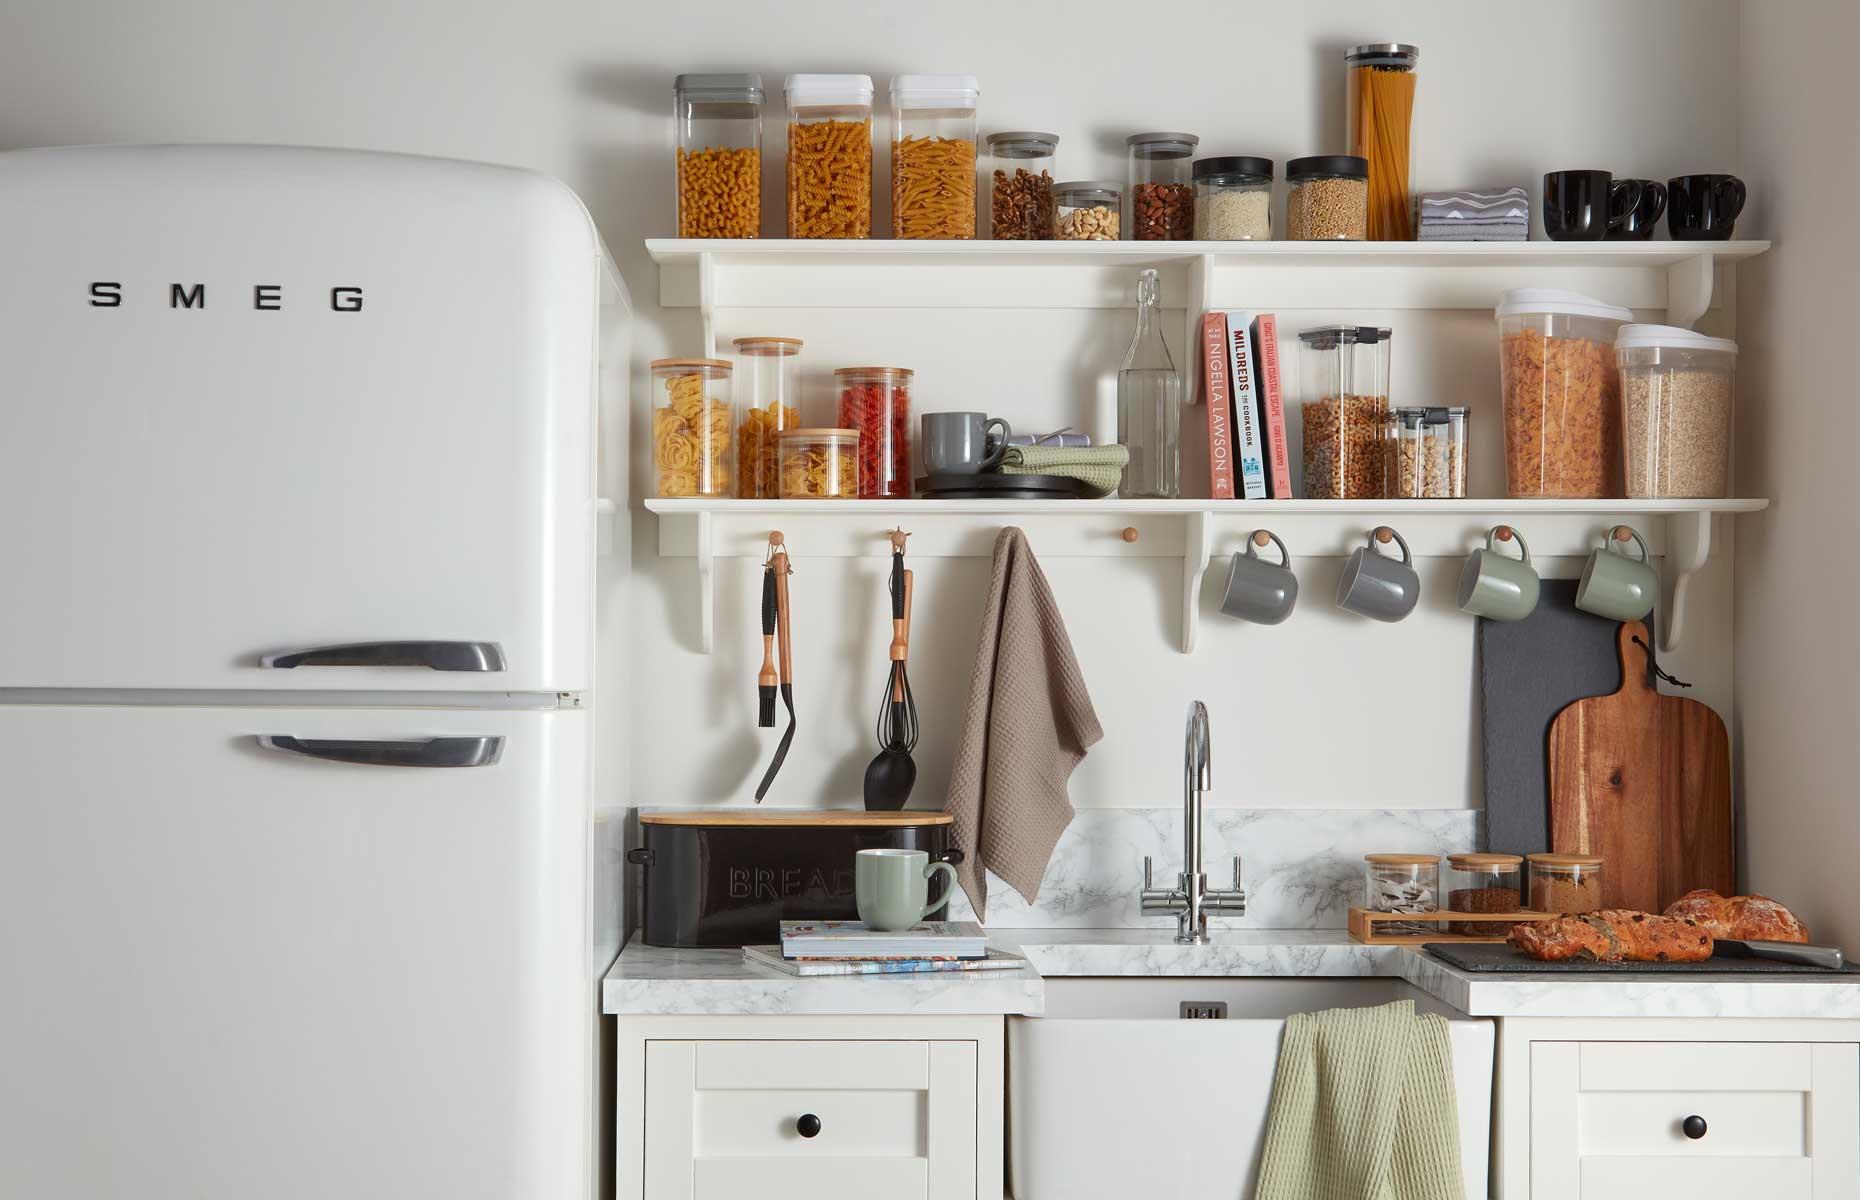 Organise your kitchen like a pro with these top tips